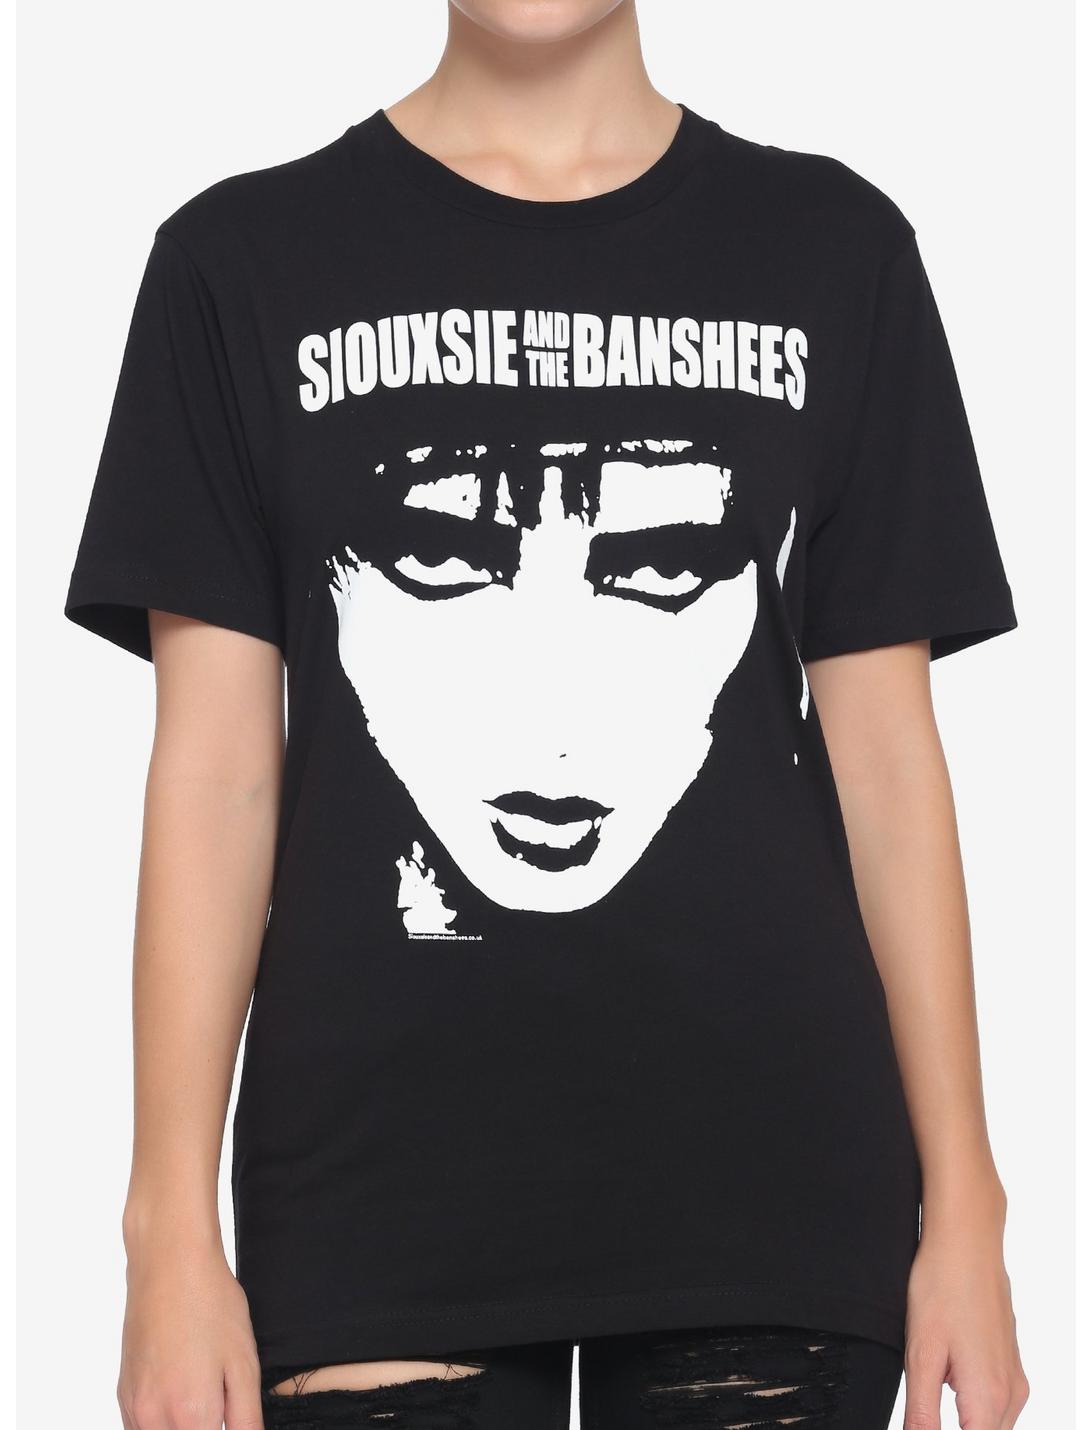 Siouxsie And The Banshees Girls T-Shirt, BLACK, hi-res